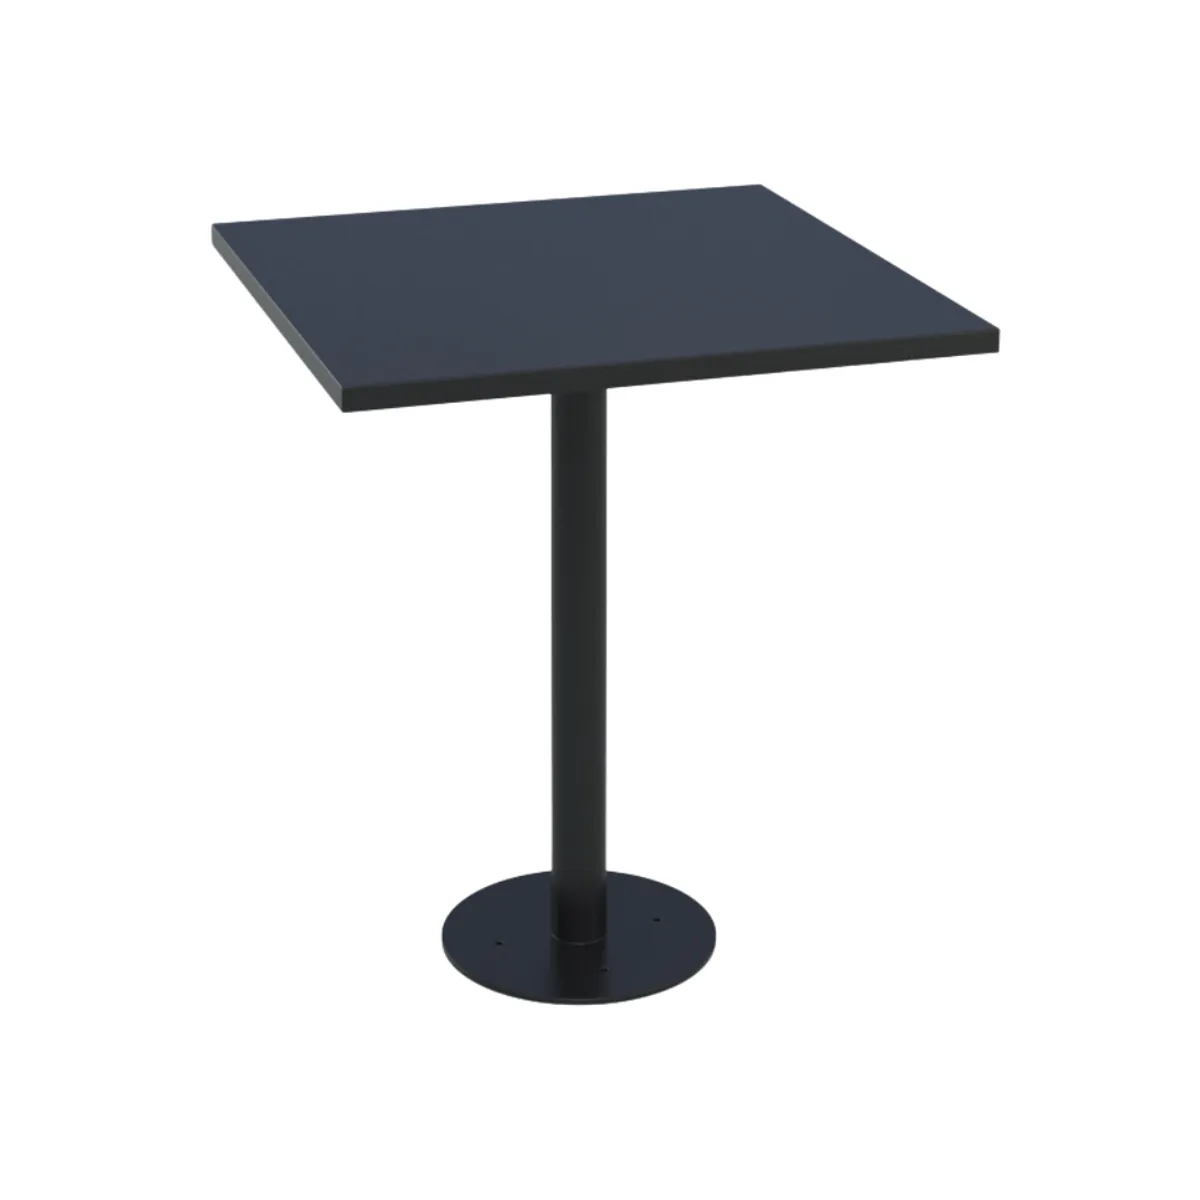 Bespoke Metropole outdoor square table 4